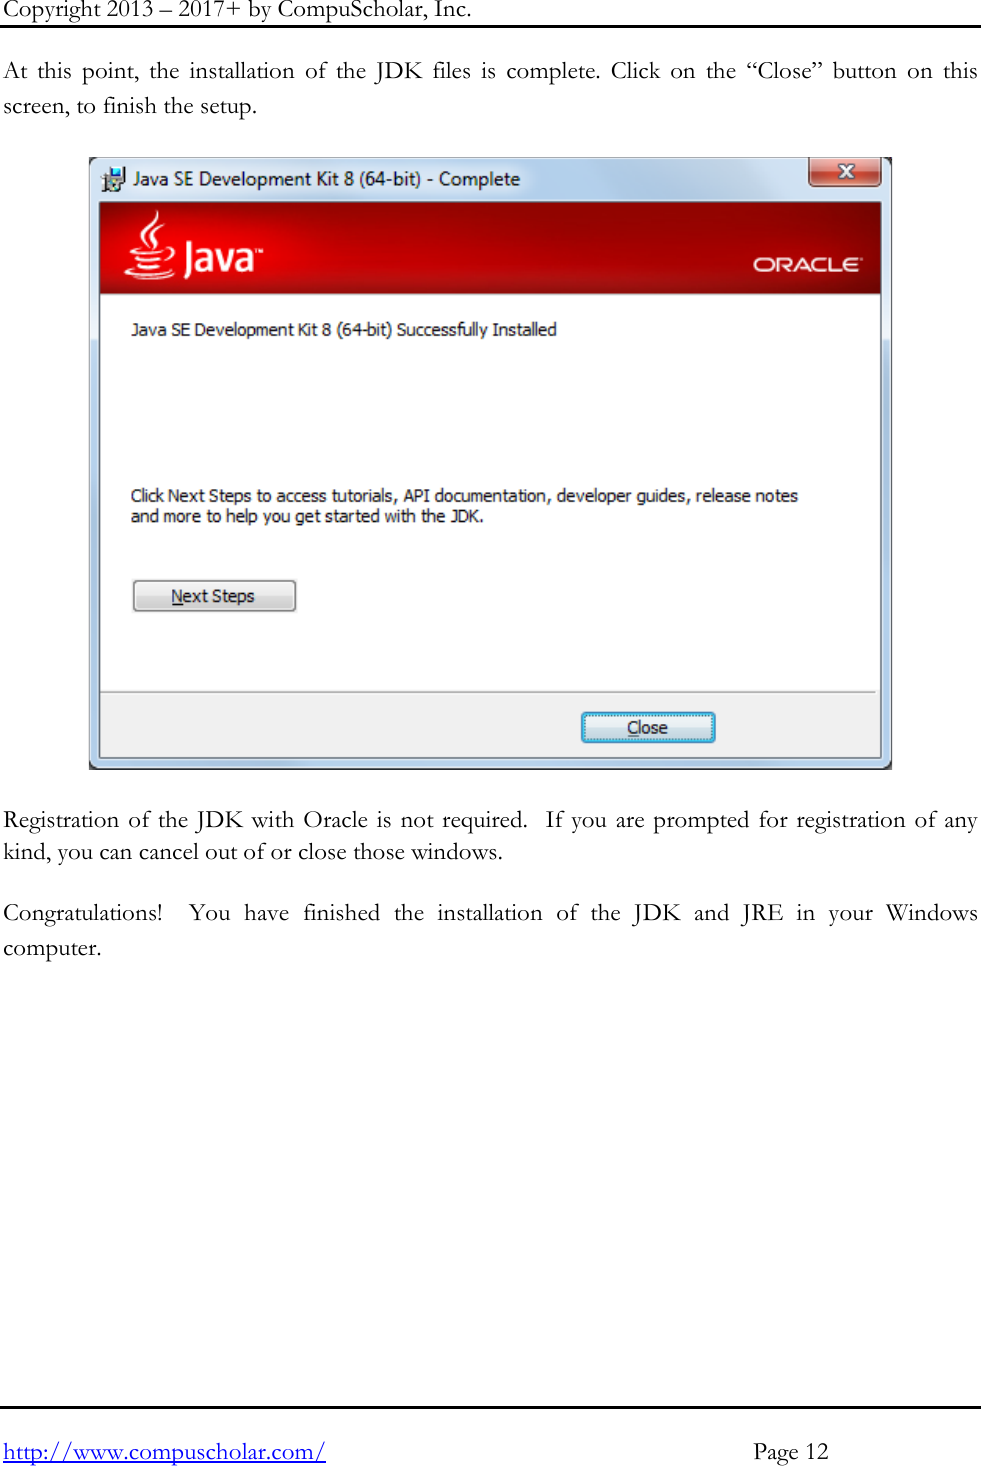 Page 12 of 12 - Java JDK Install Instructions Windows